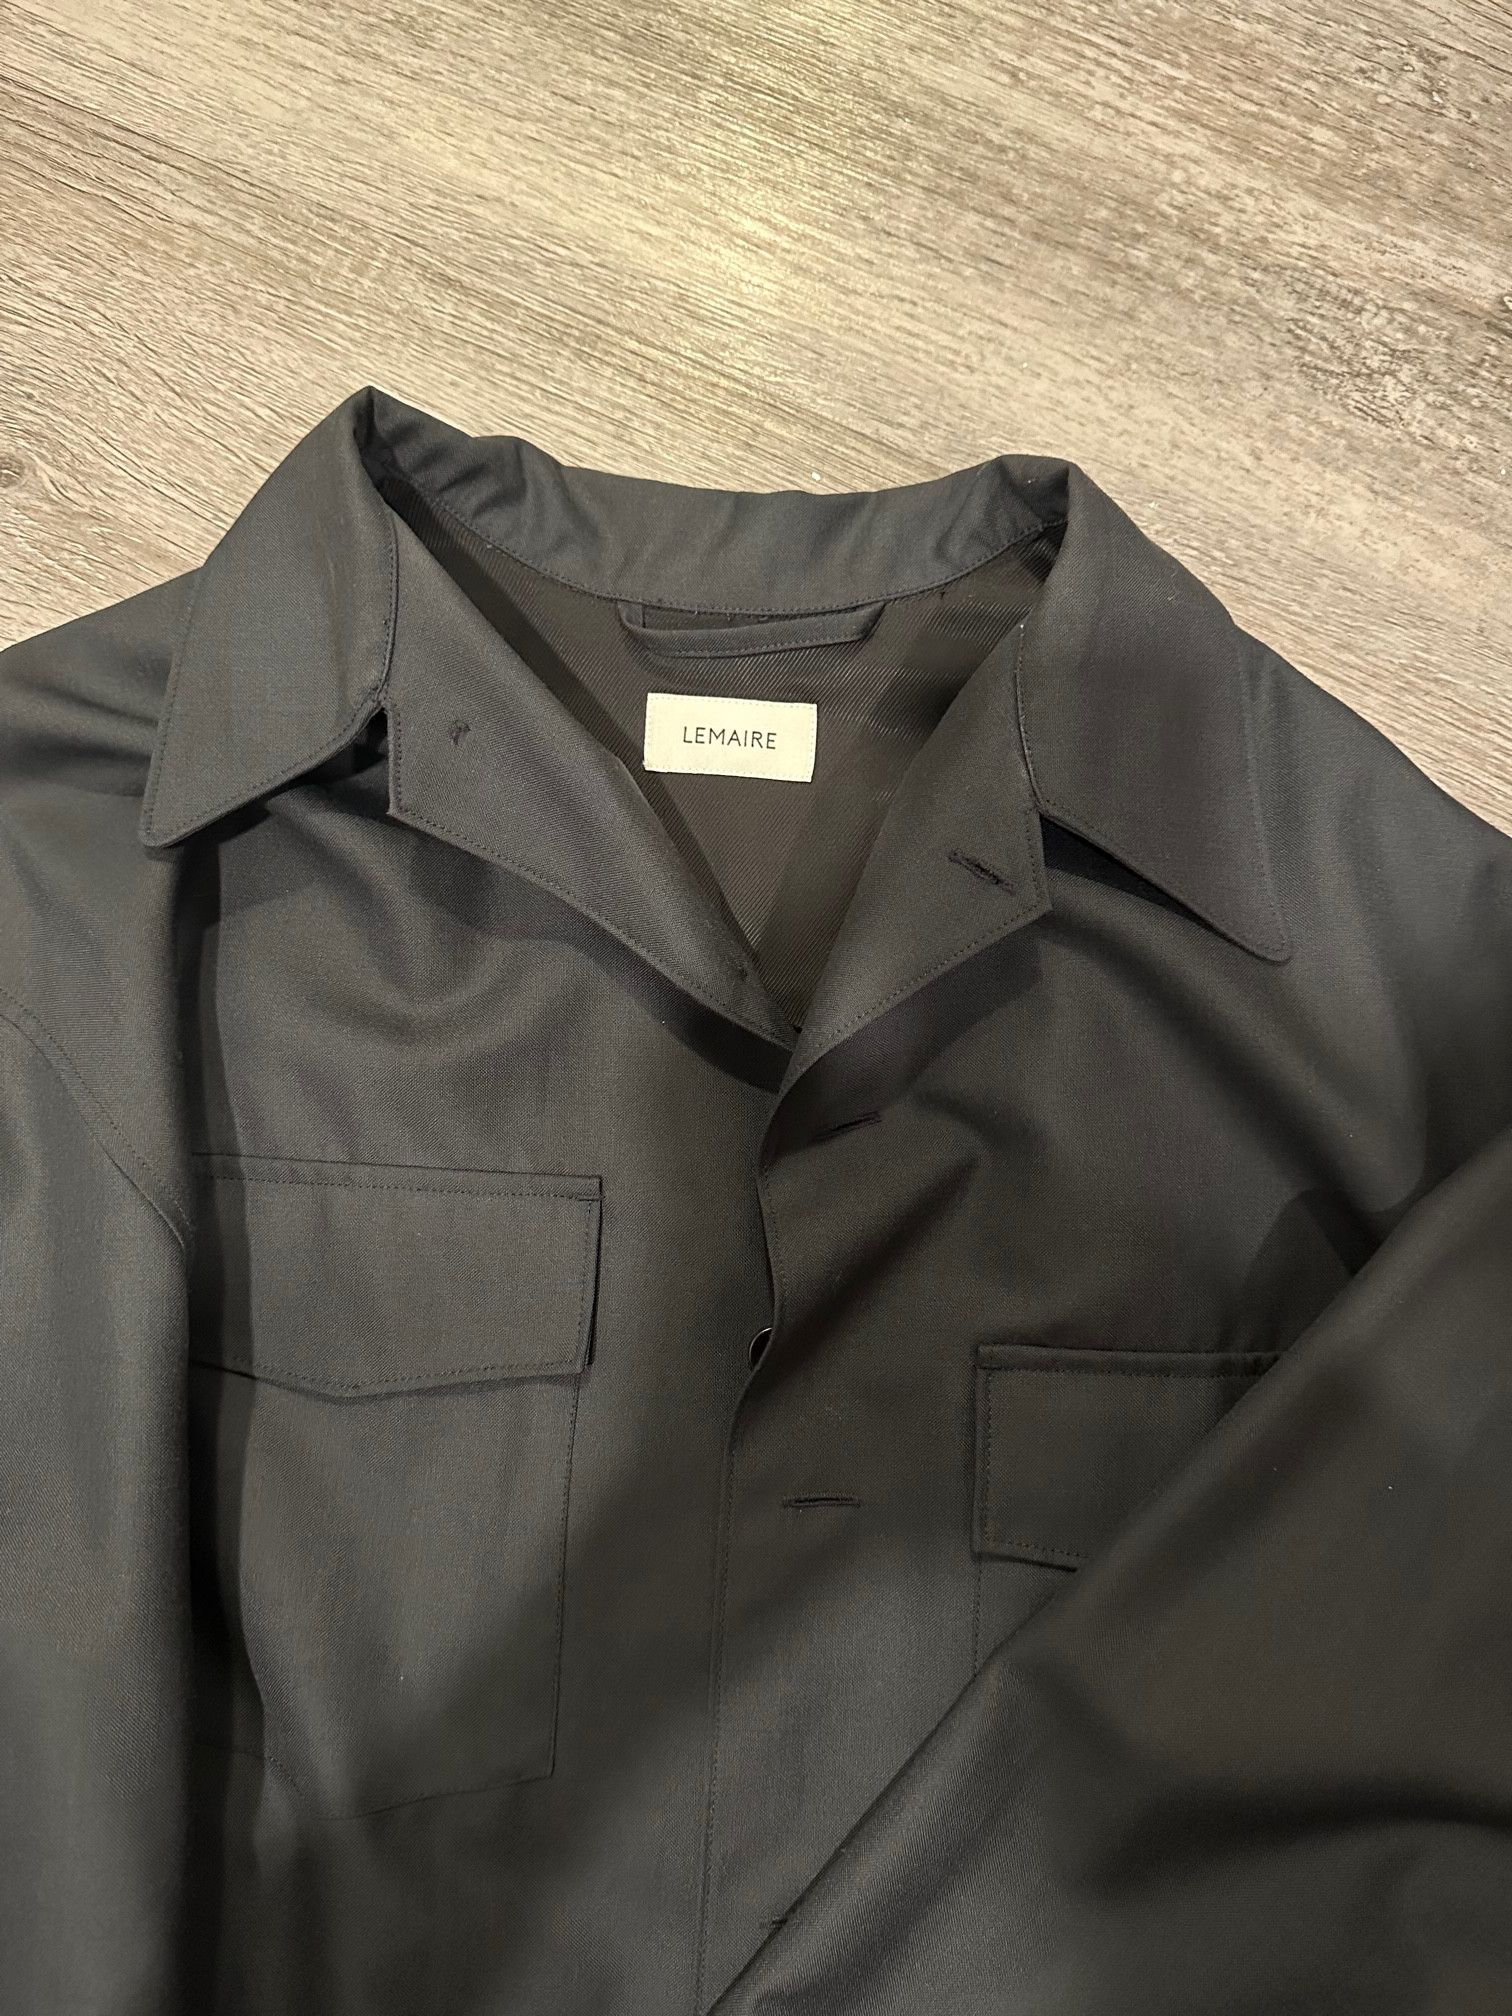 Lemaire Lemaire Convertible Collar Shirt 'Anthracite' | Grailed